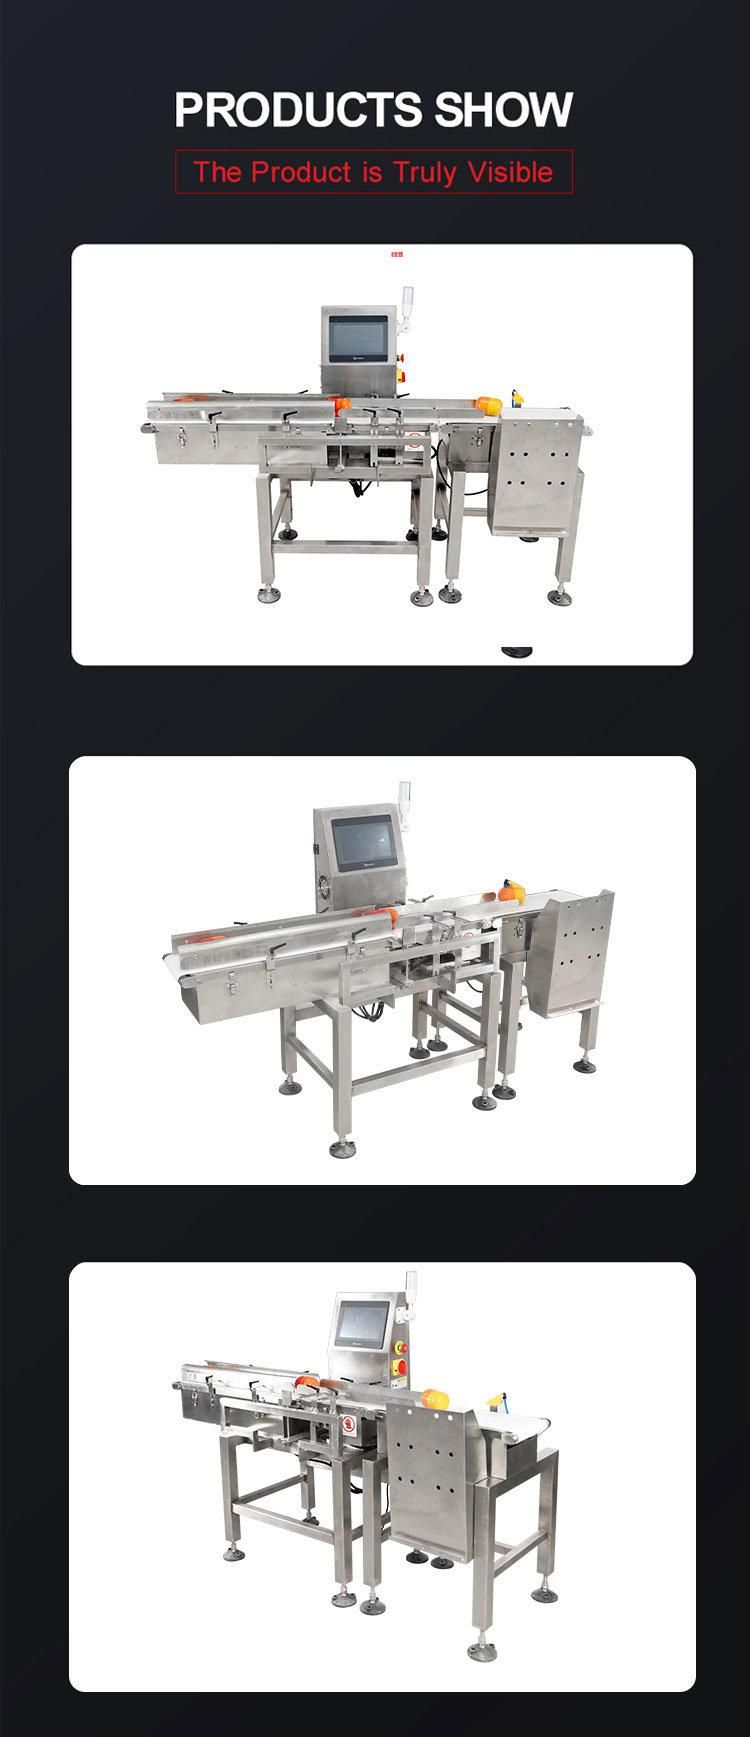 High Precision and Quality Assurance Large Touch Screen Control Weighing Machine with Rejection Function